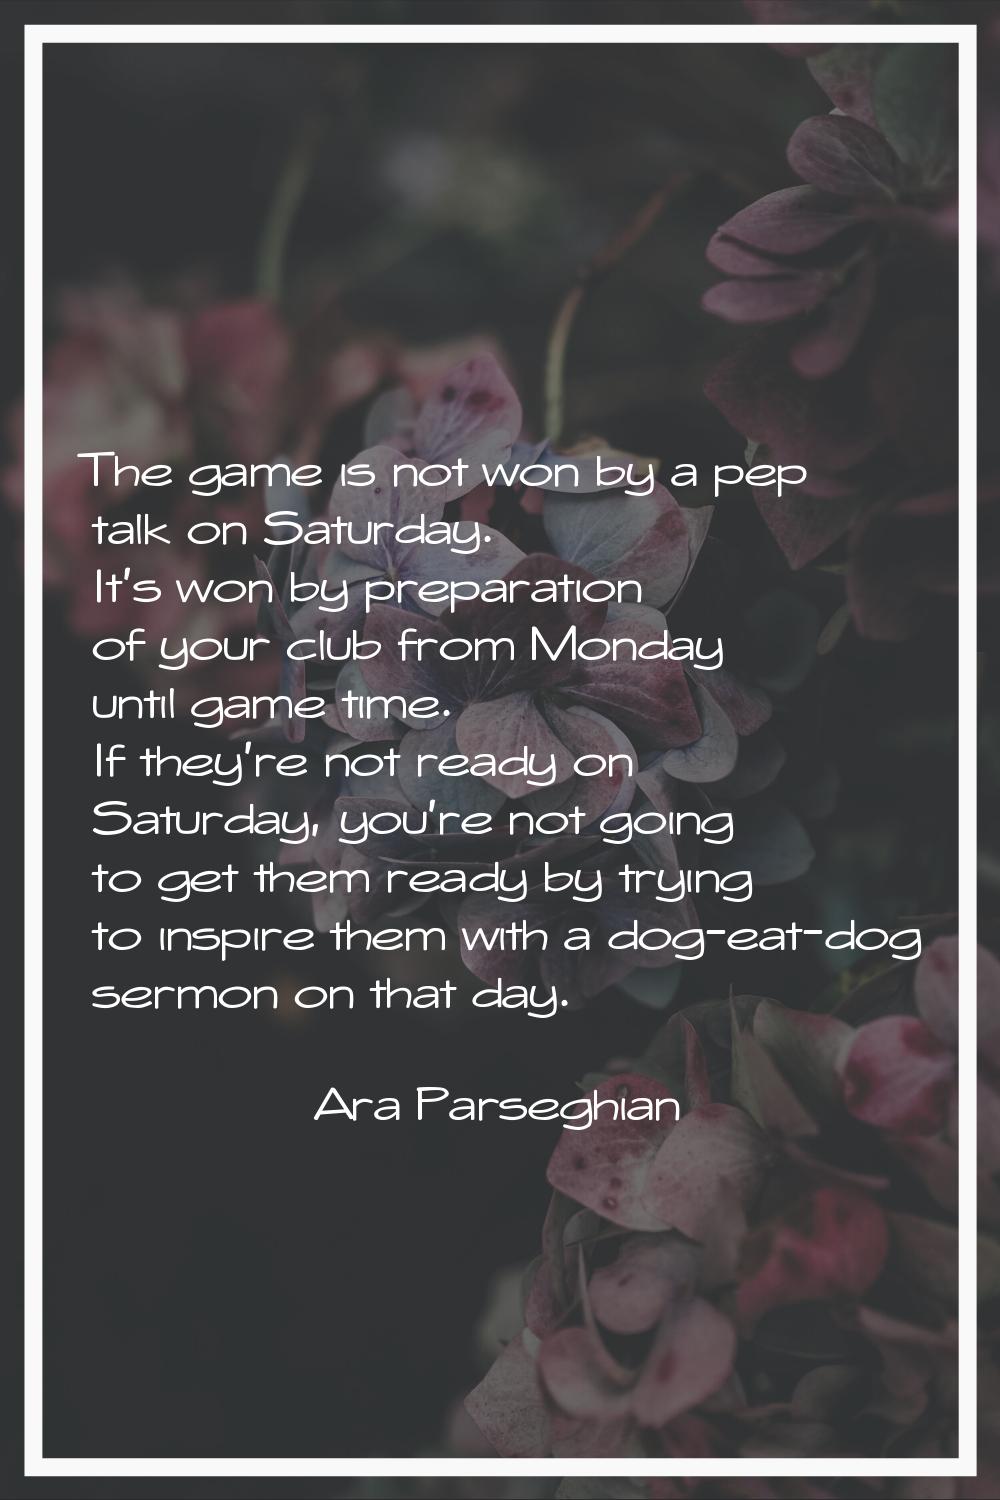 The game is not won by a pep talk on Saturday. It's won by preparation of your club from Monday unt